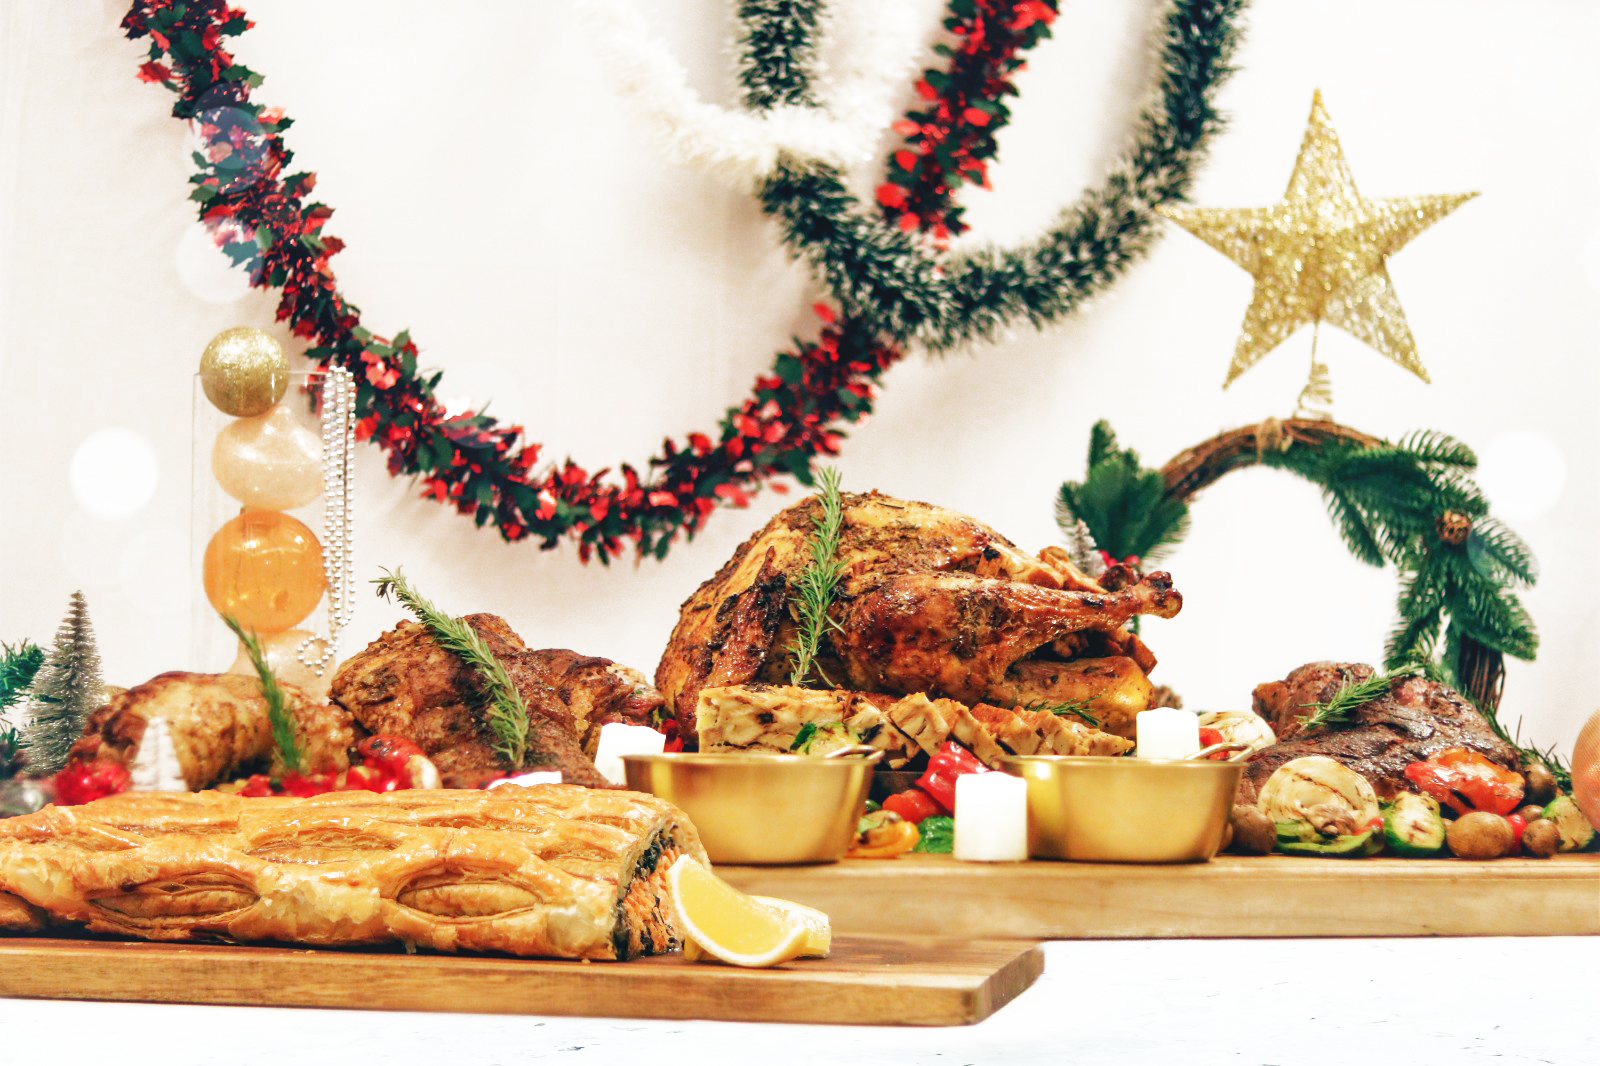 Celebrate the Festive Season at The Trans Luxury Hotel Bandung, Christmas at The Restaurant